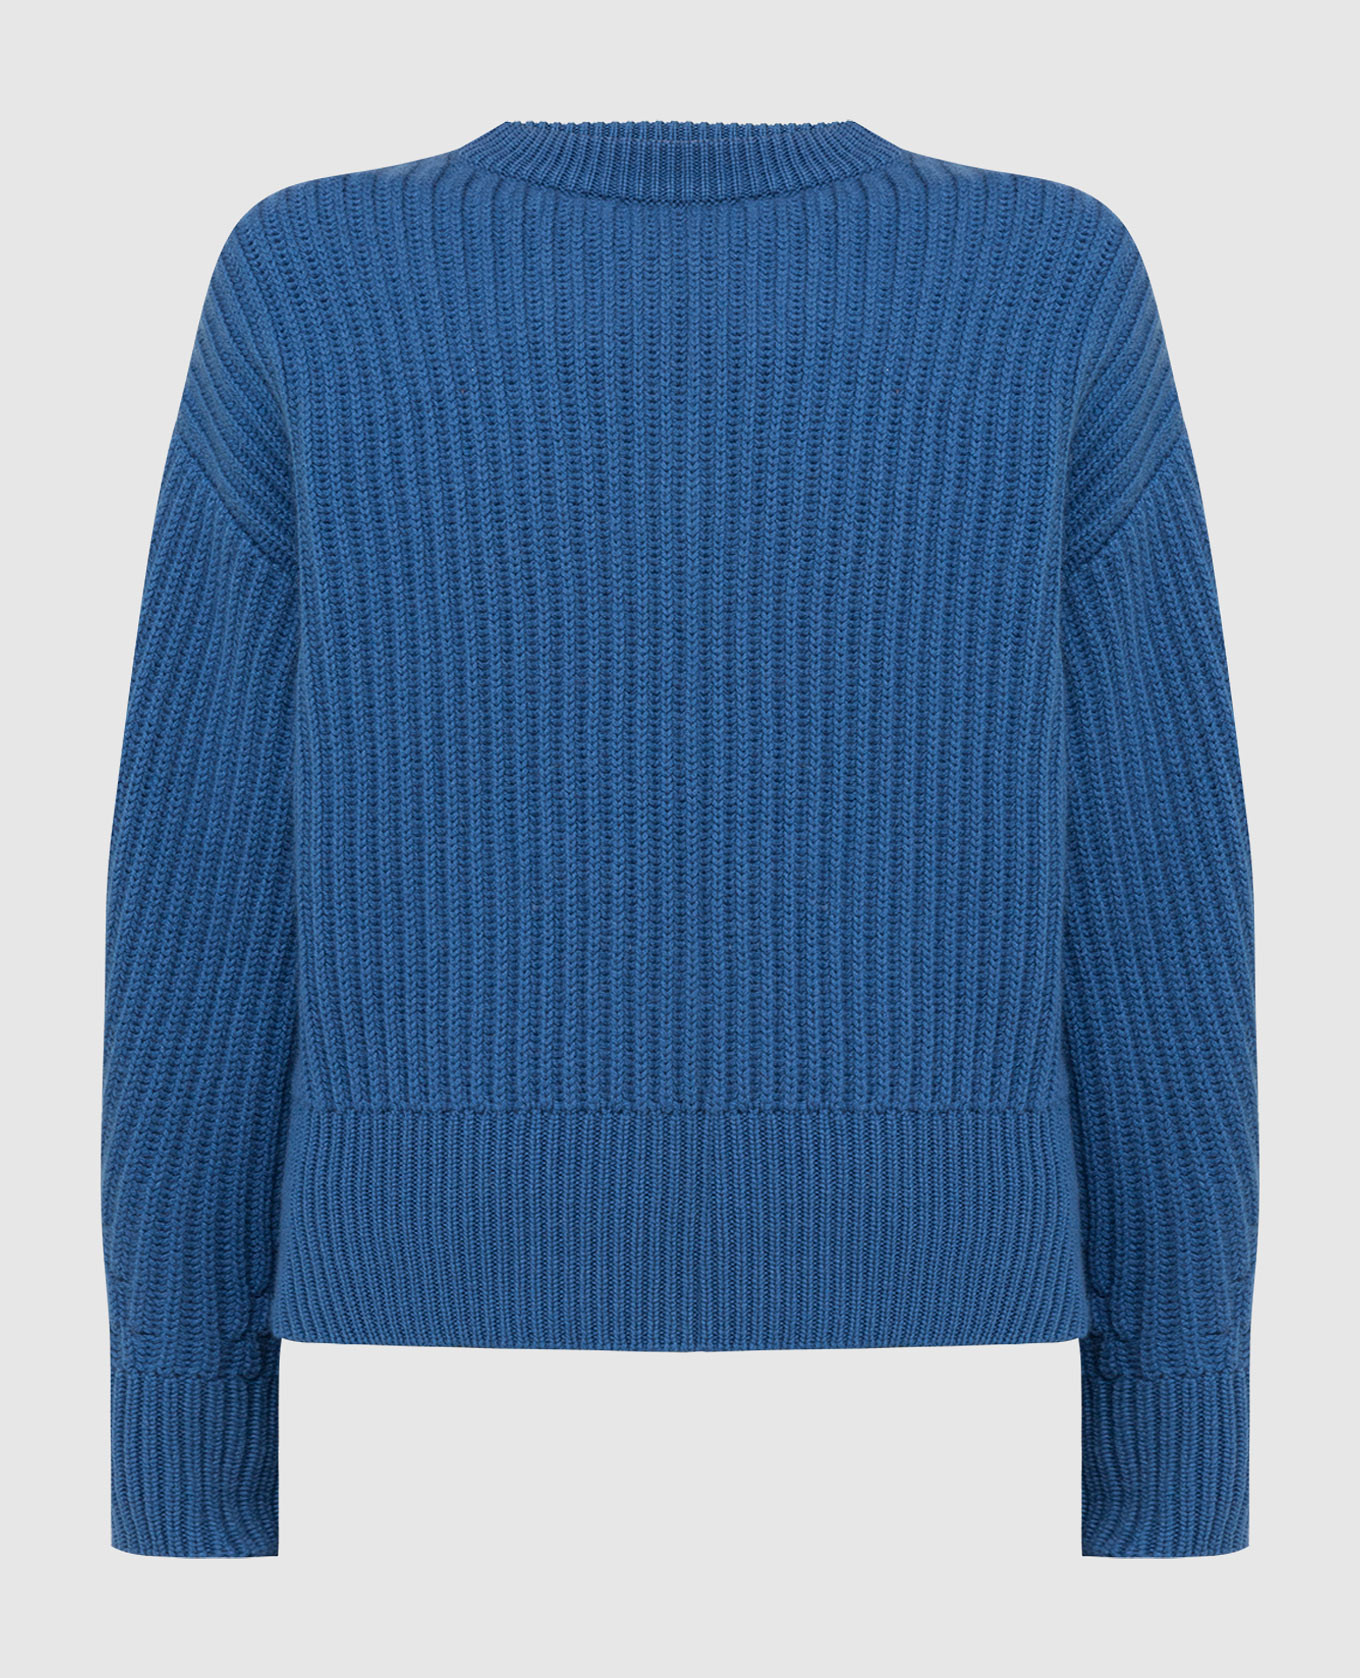 Blue wool and cashmere sweater